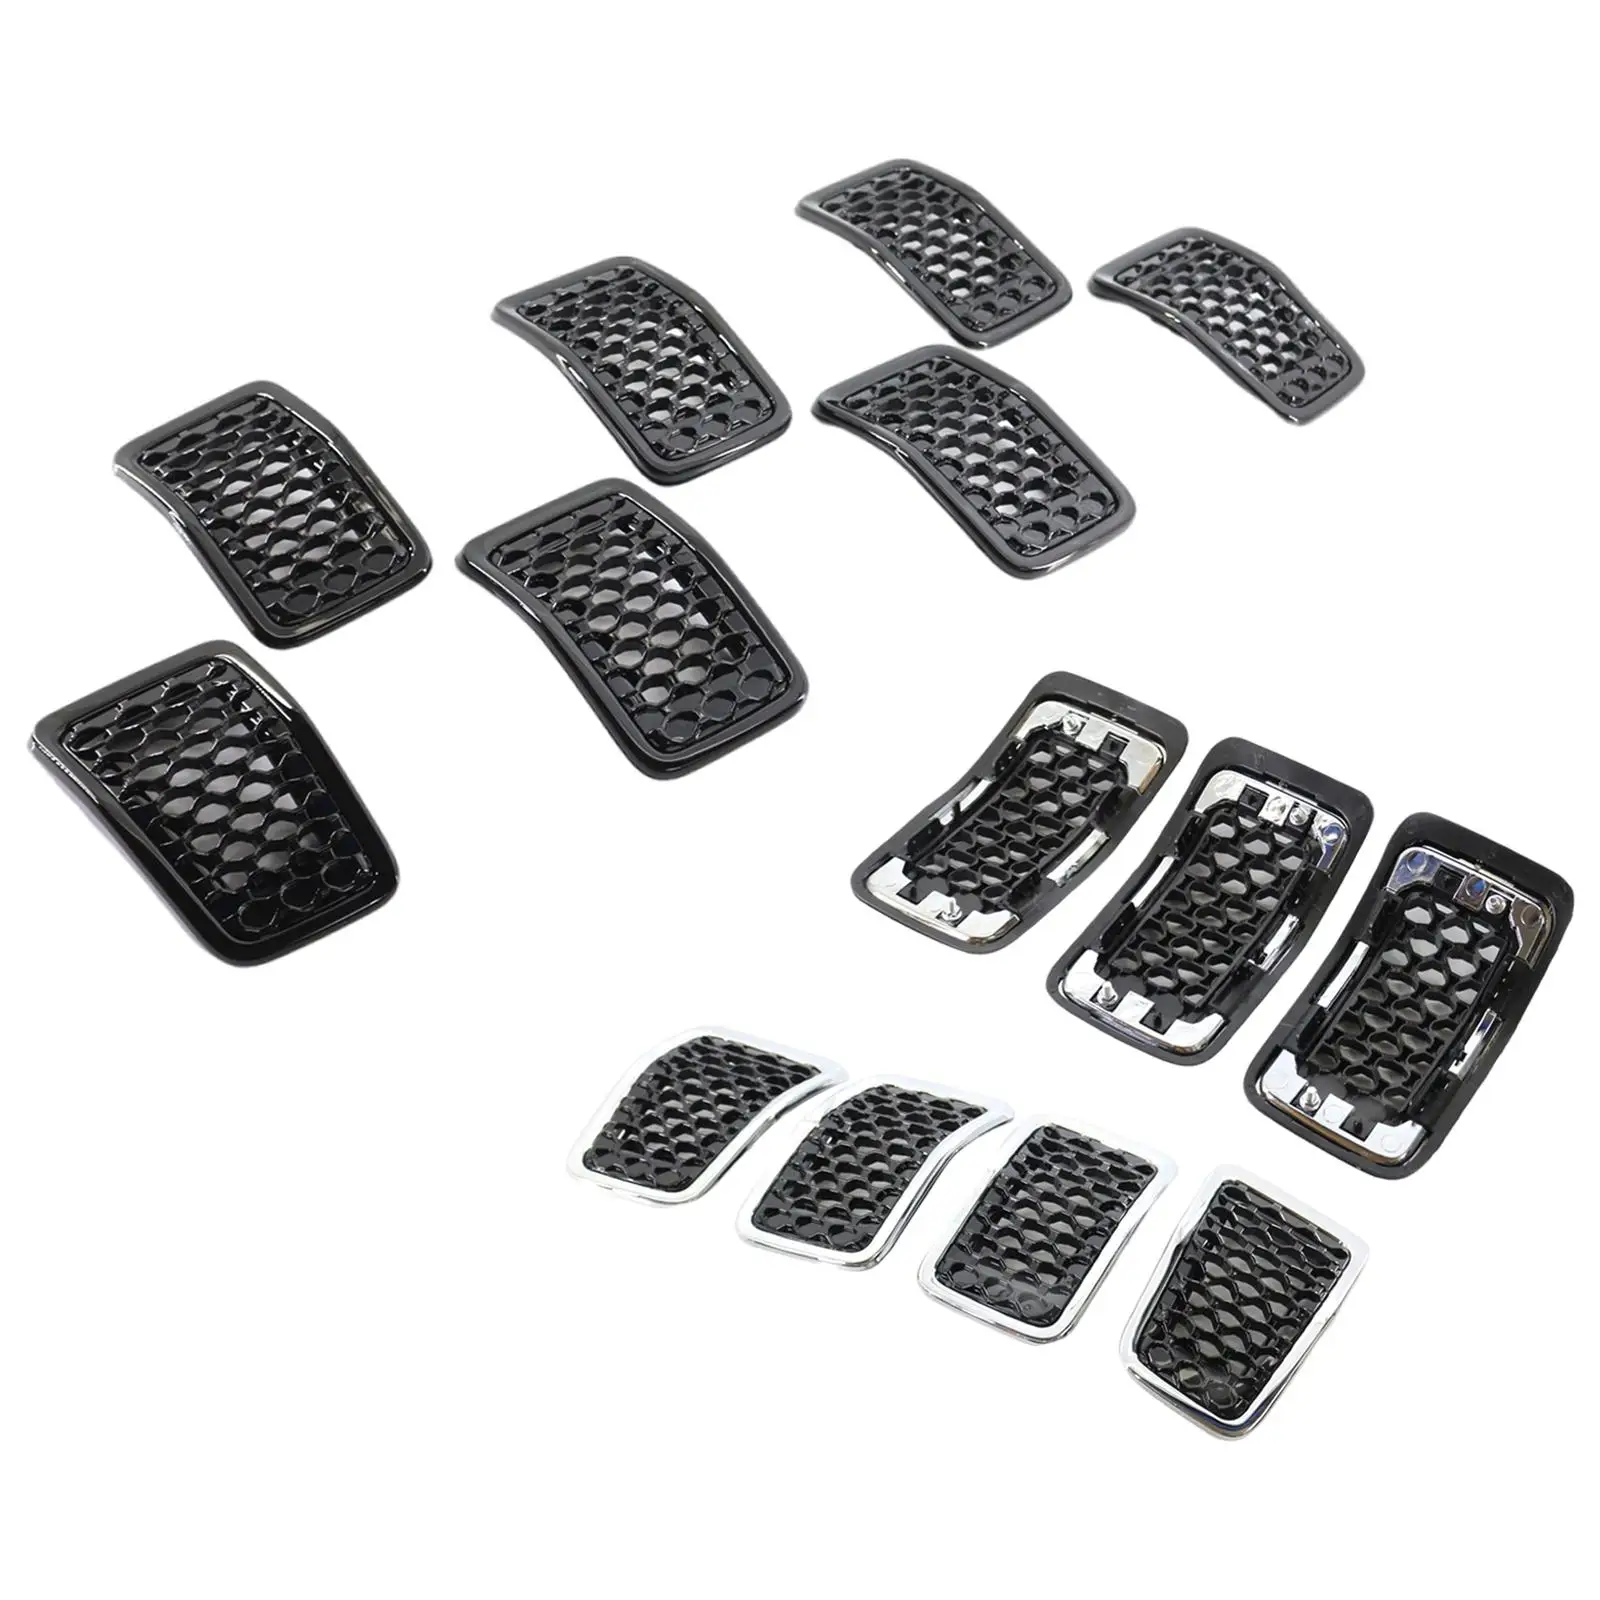 7 Mesh Grille Insert, Car Grille Covers for Cherokee 2019-22 ,Replacement  Decorative Accessories